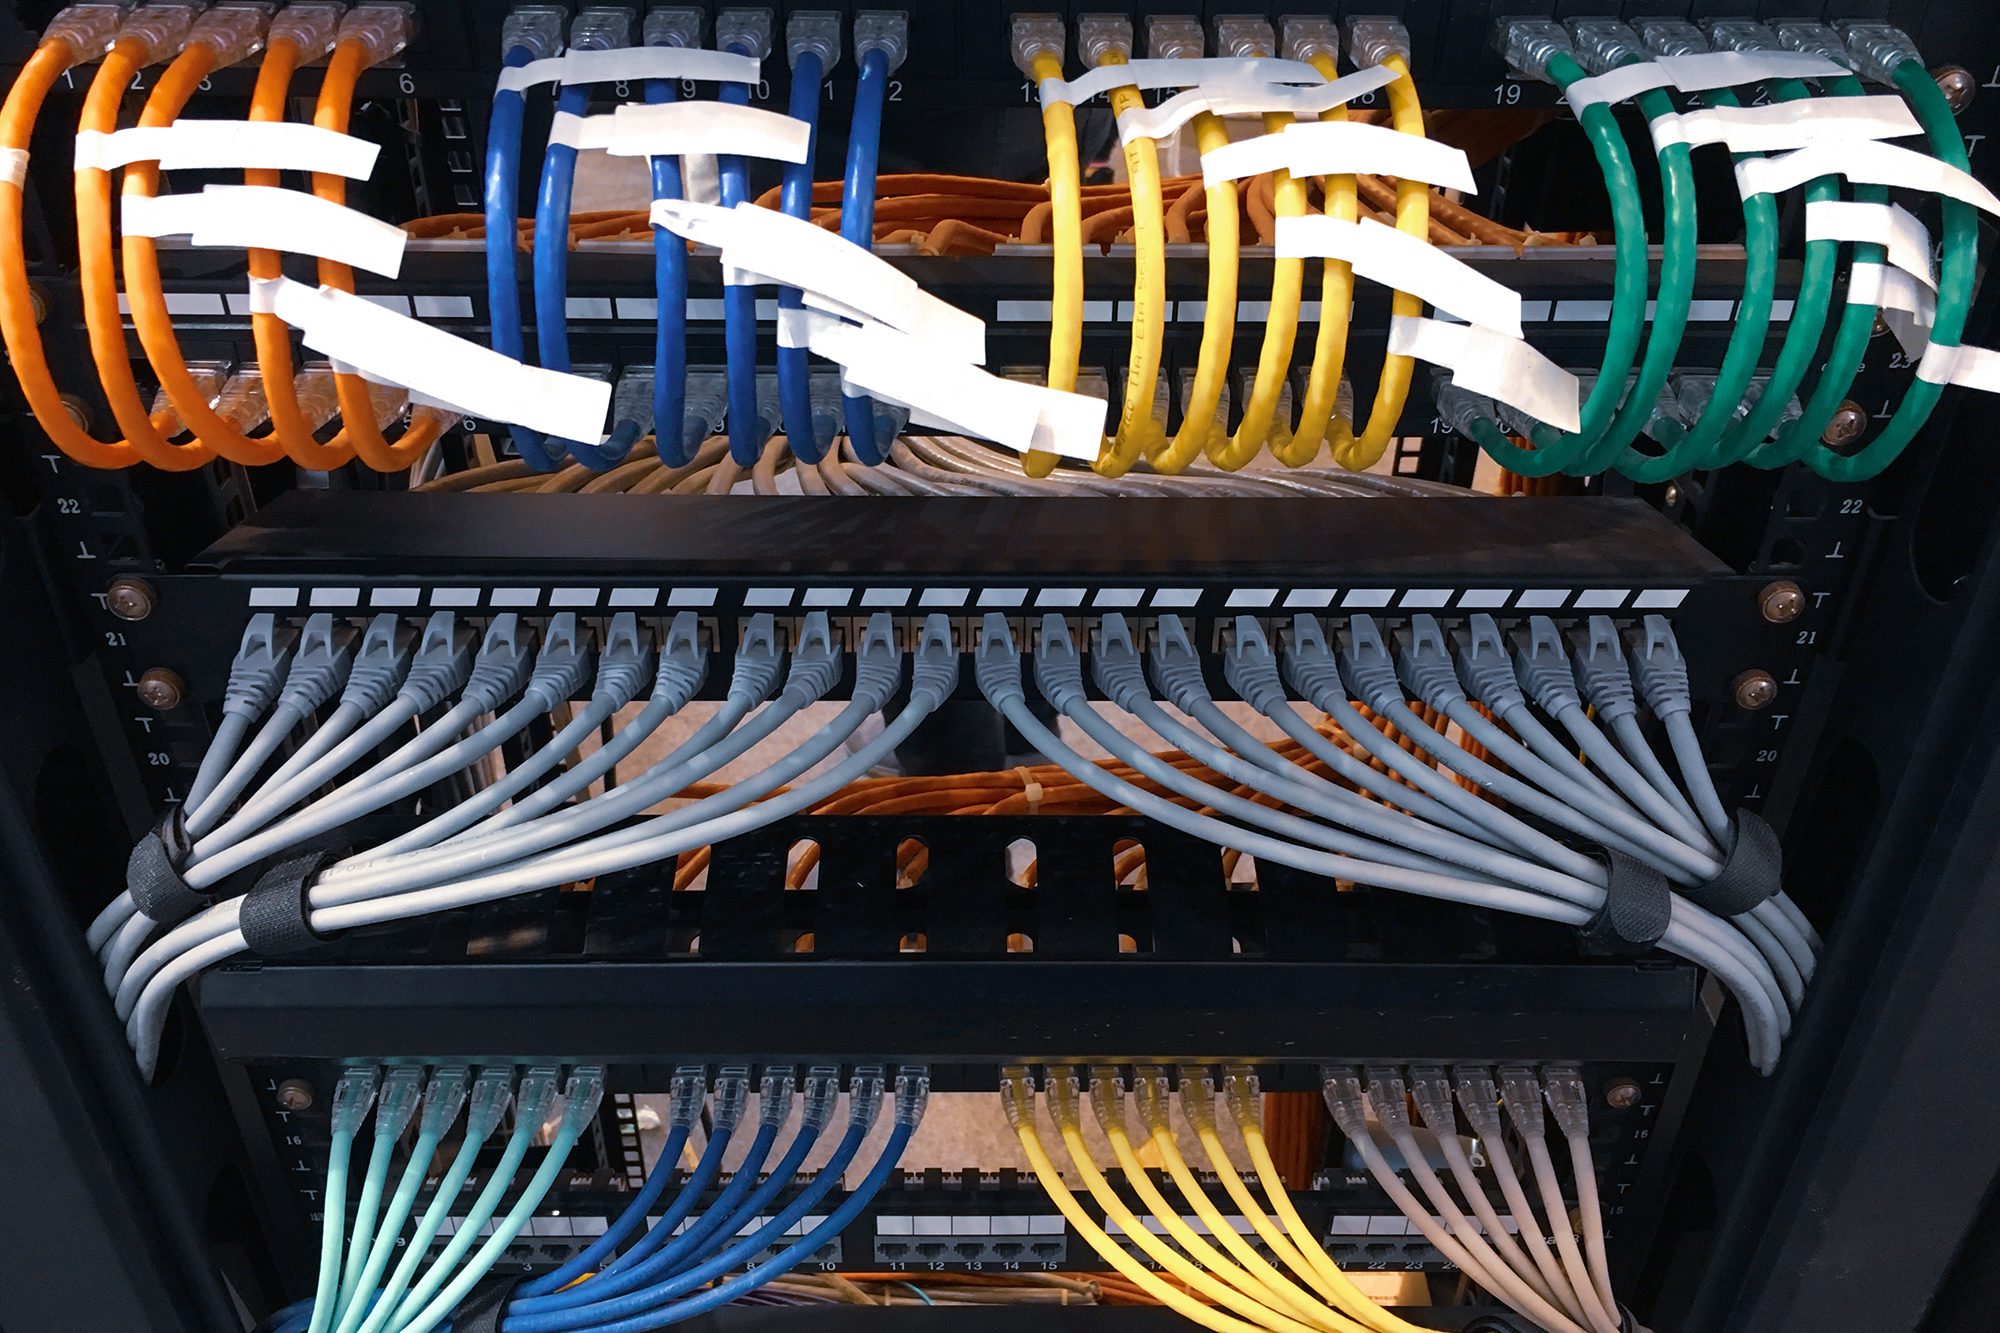 https://csijax.com/wp-content/uploads/2021/12/The-Importance-of-Labeling-Network-Cables.jpg